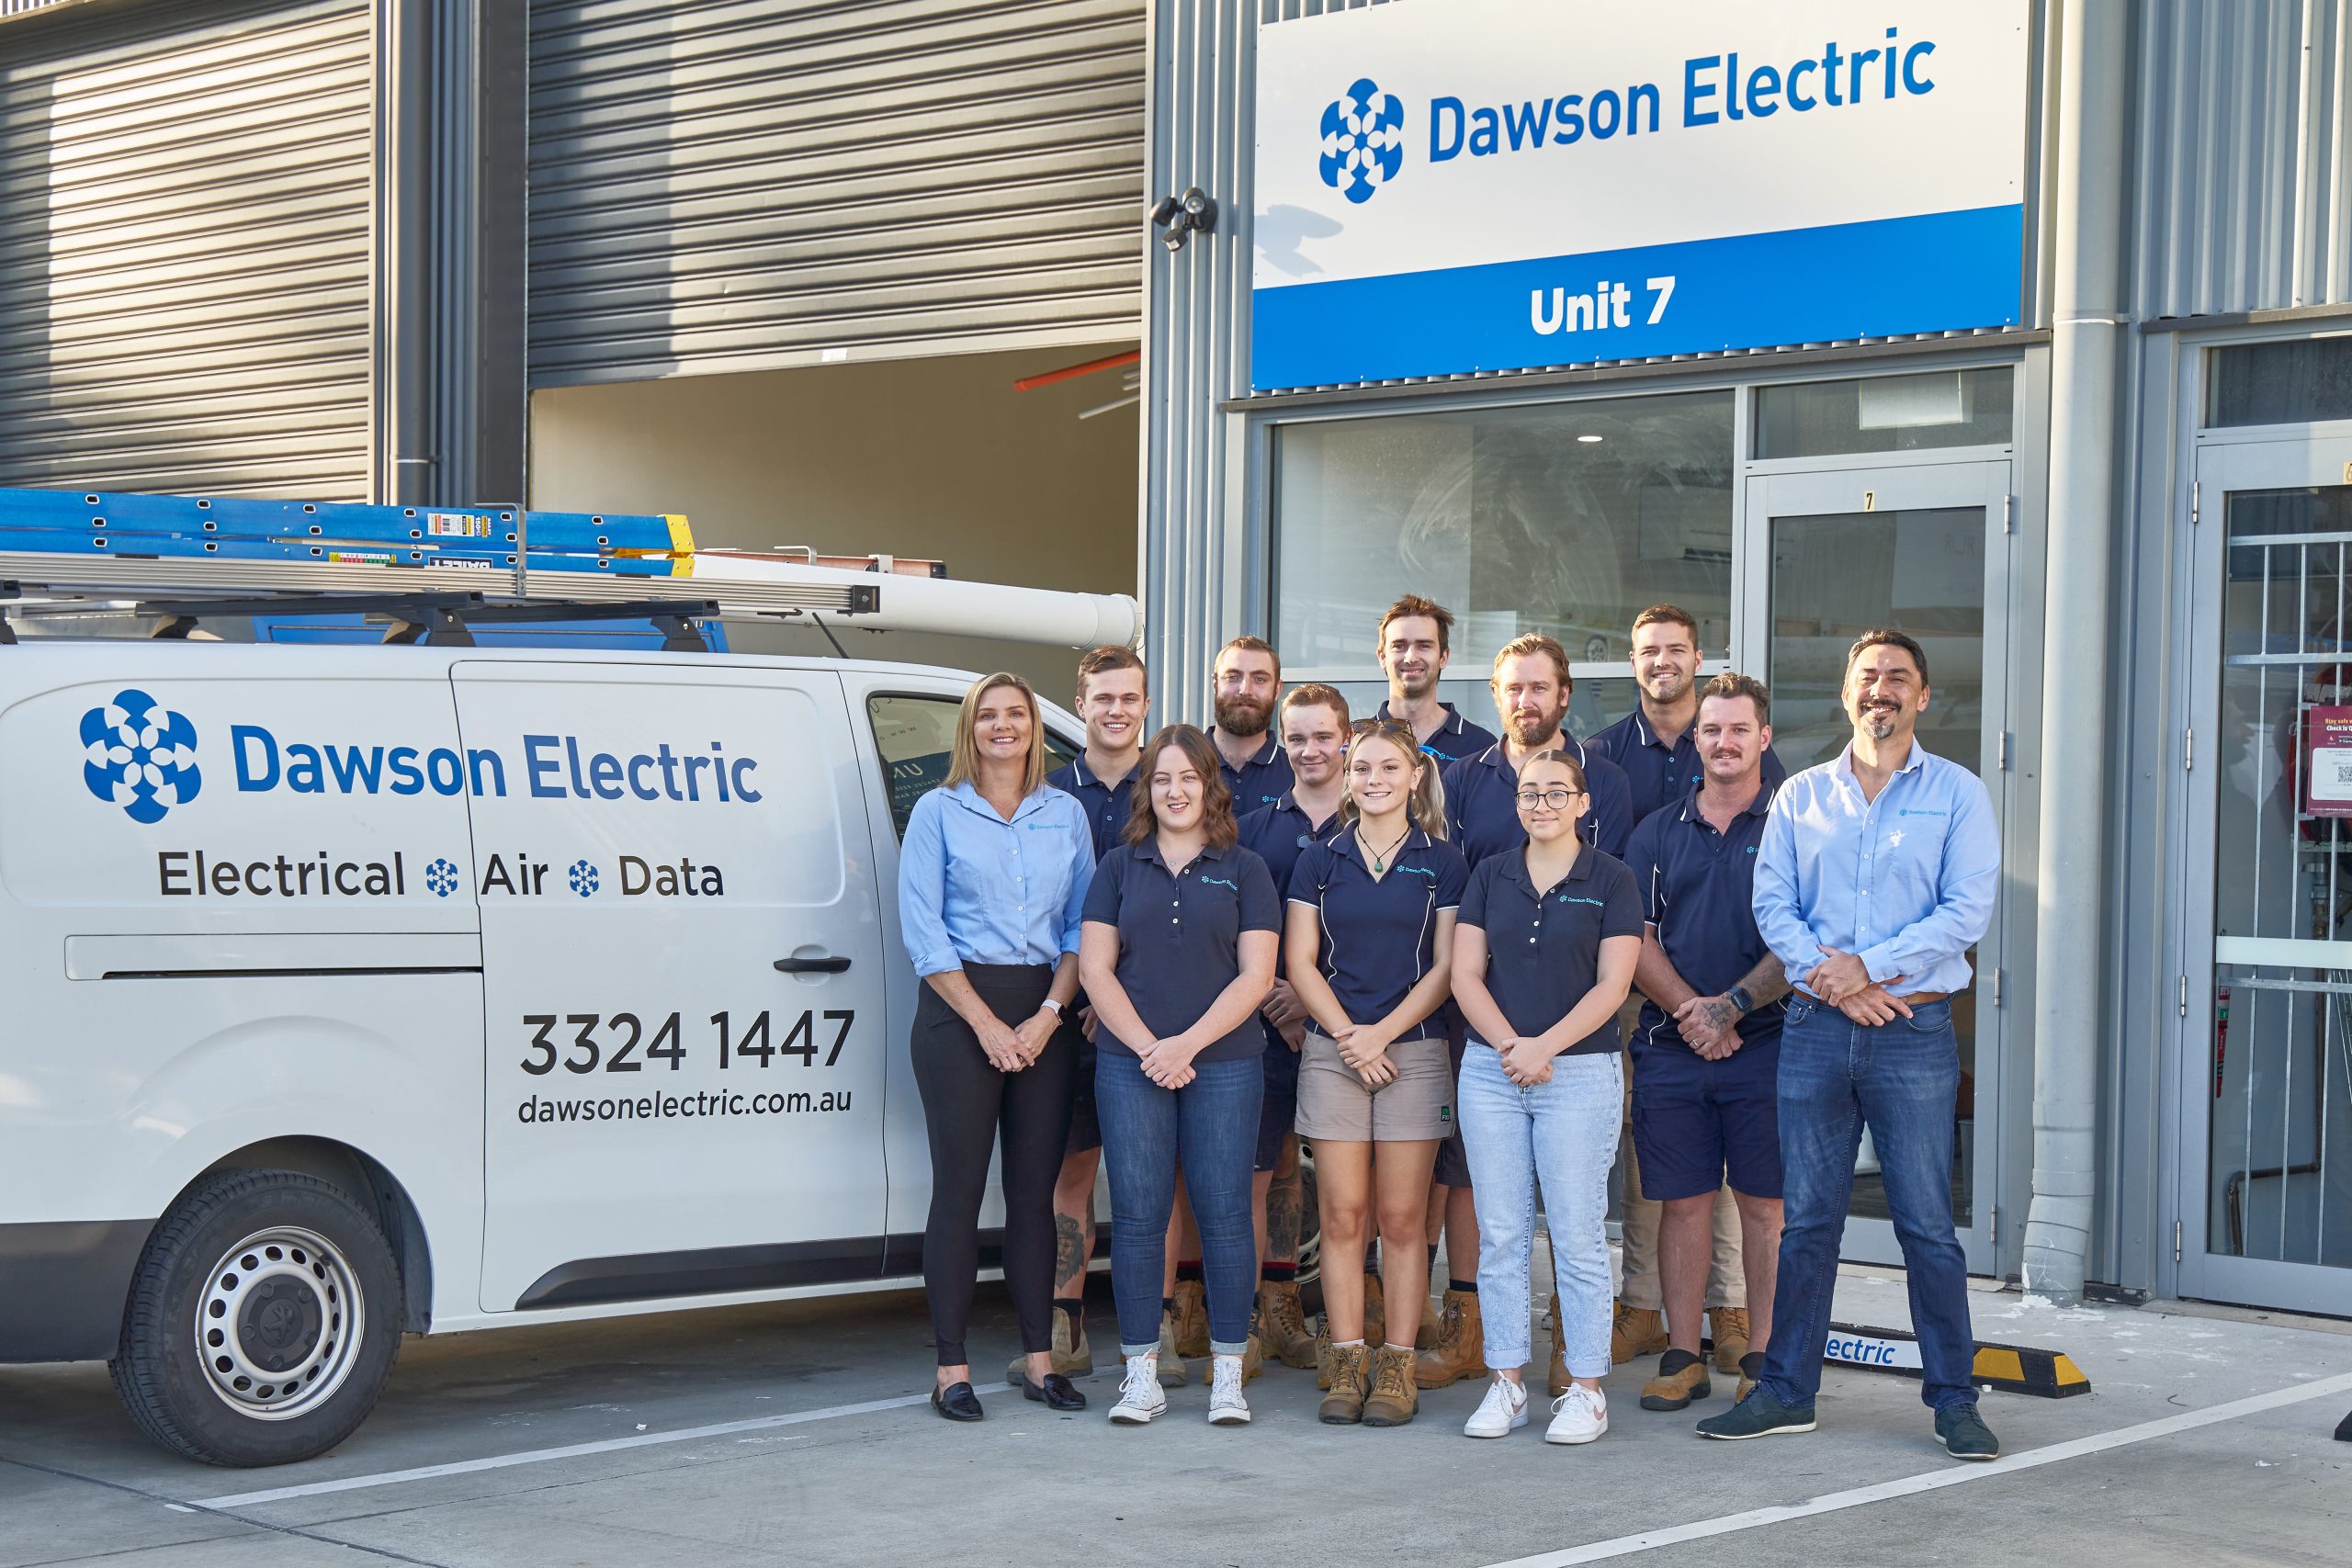 Electricians standing in front of Dawson Electric Van